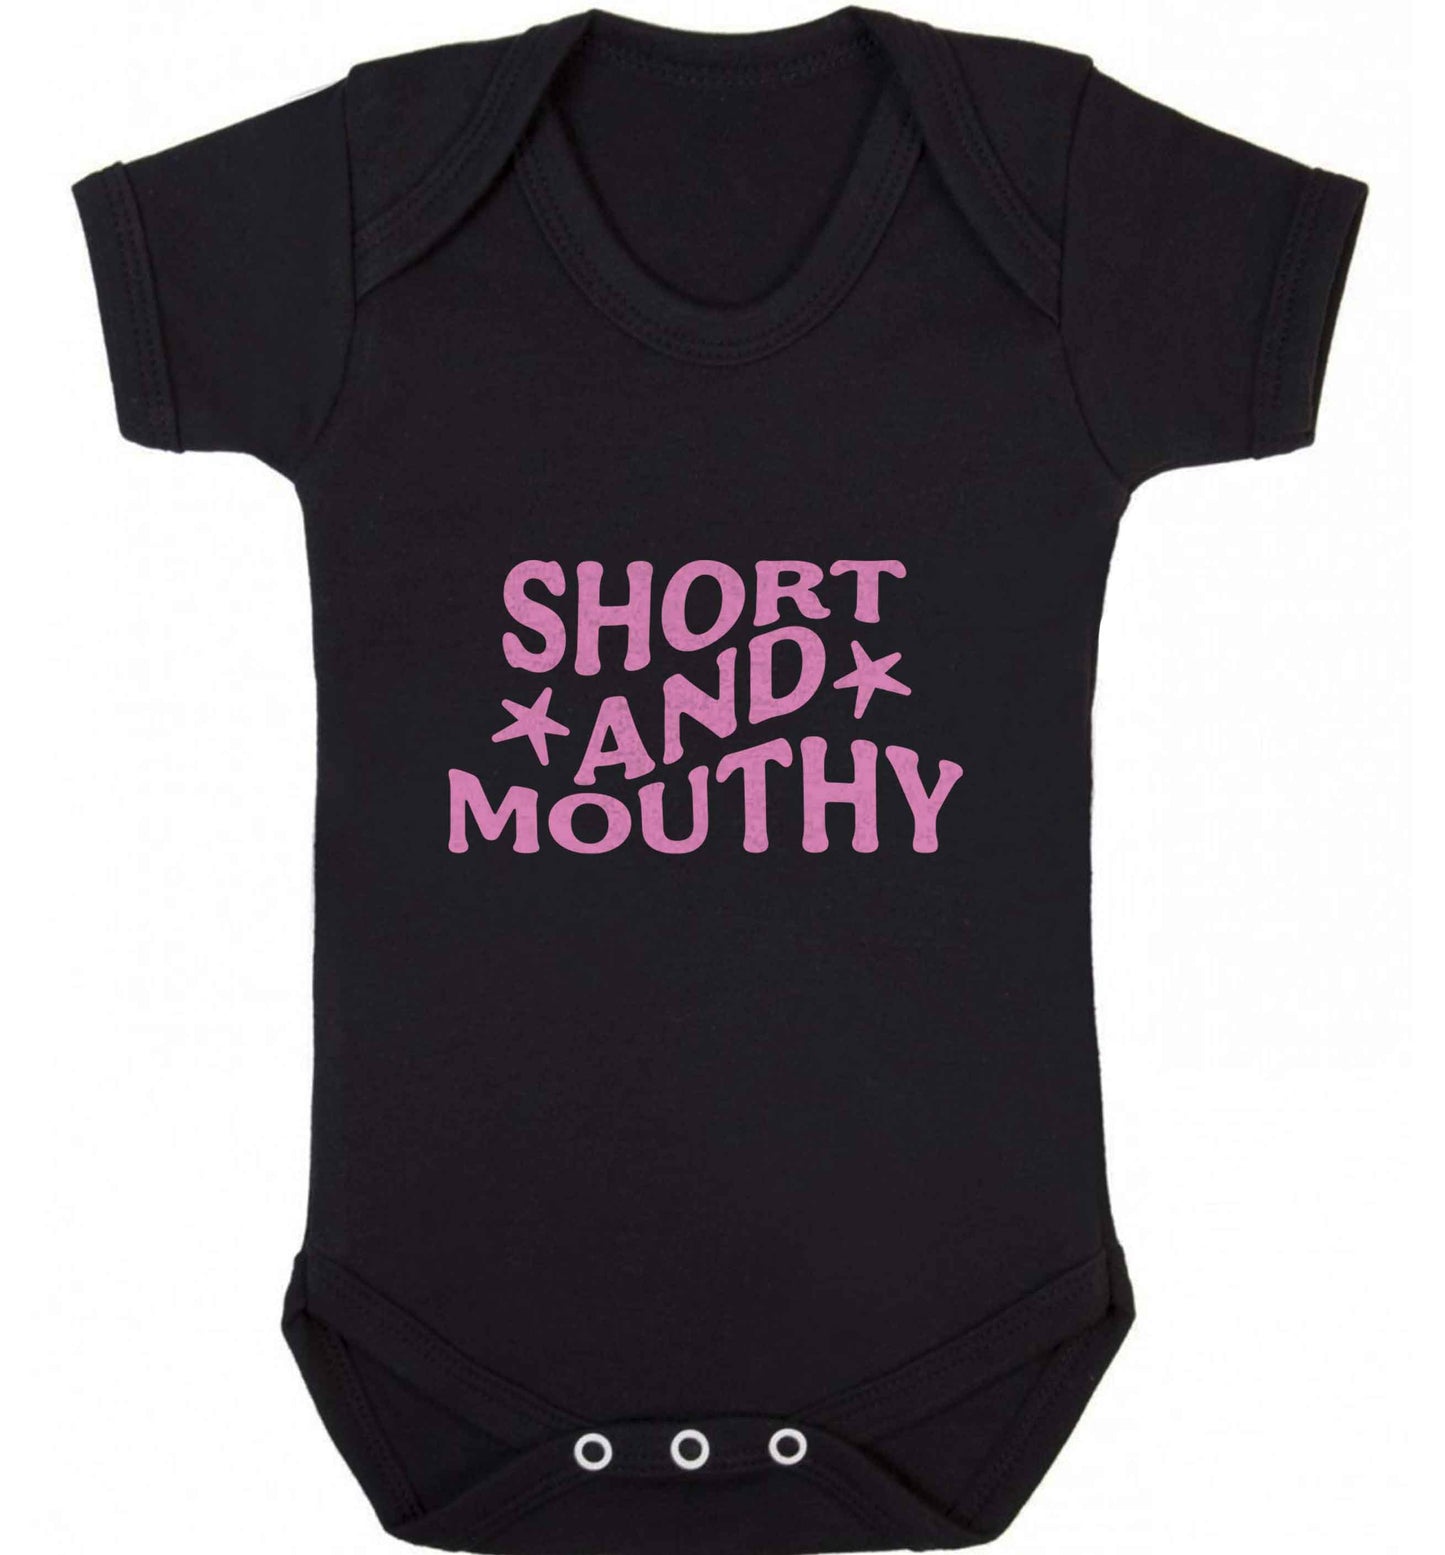 Short and mouthy baby vest black 18-24 months